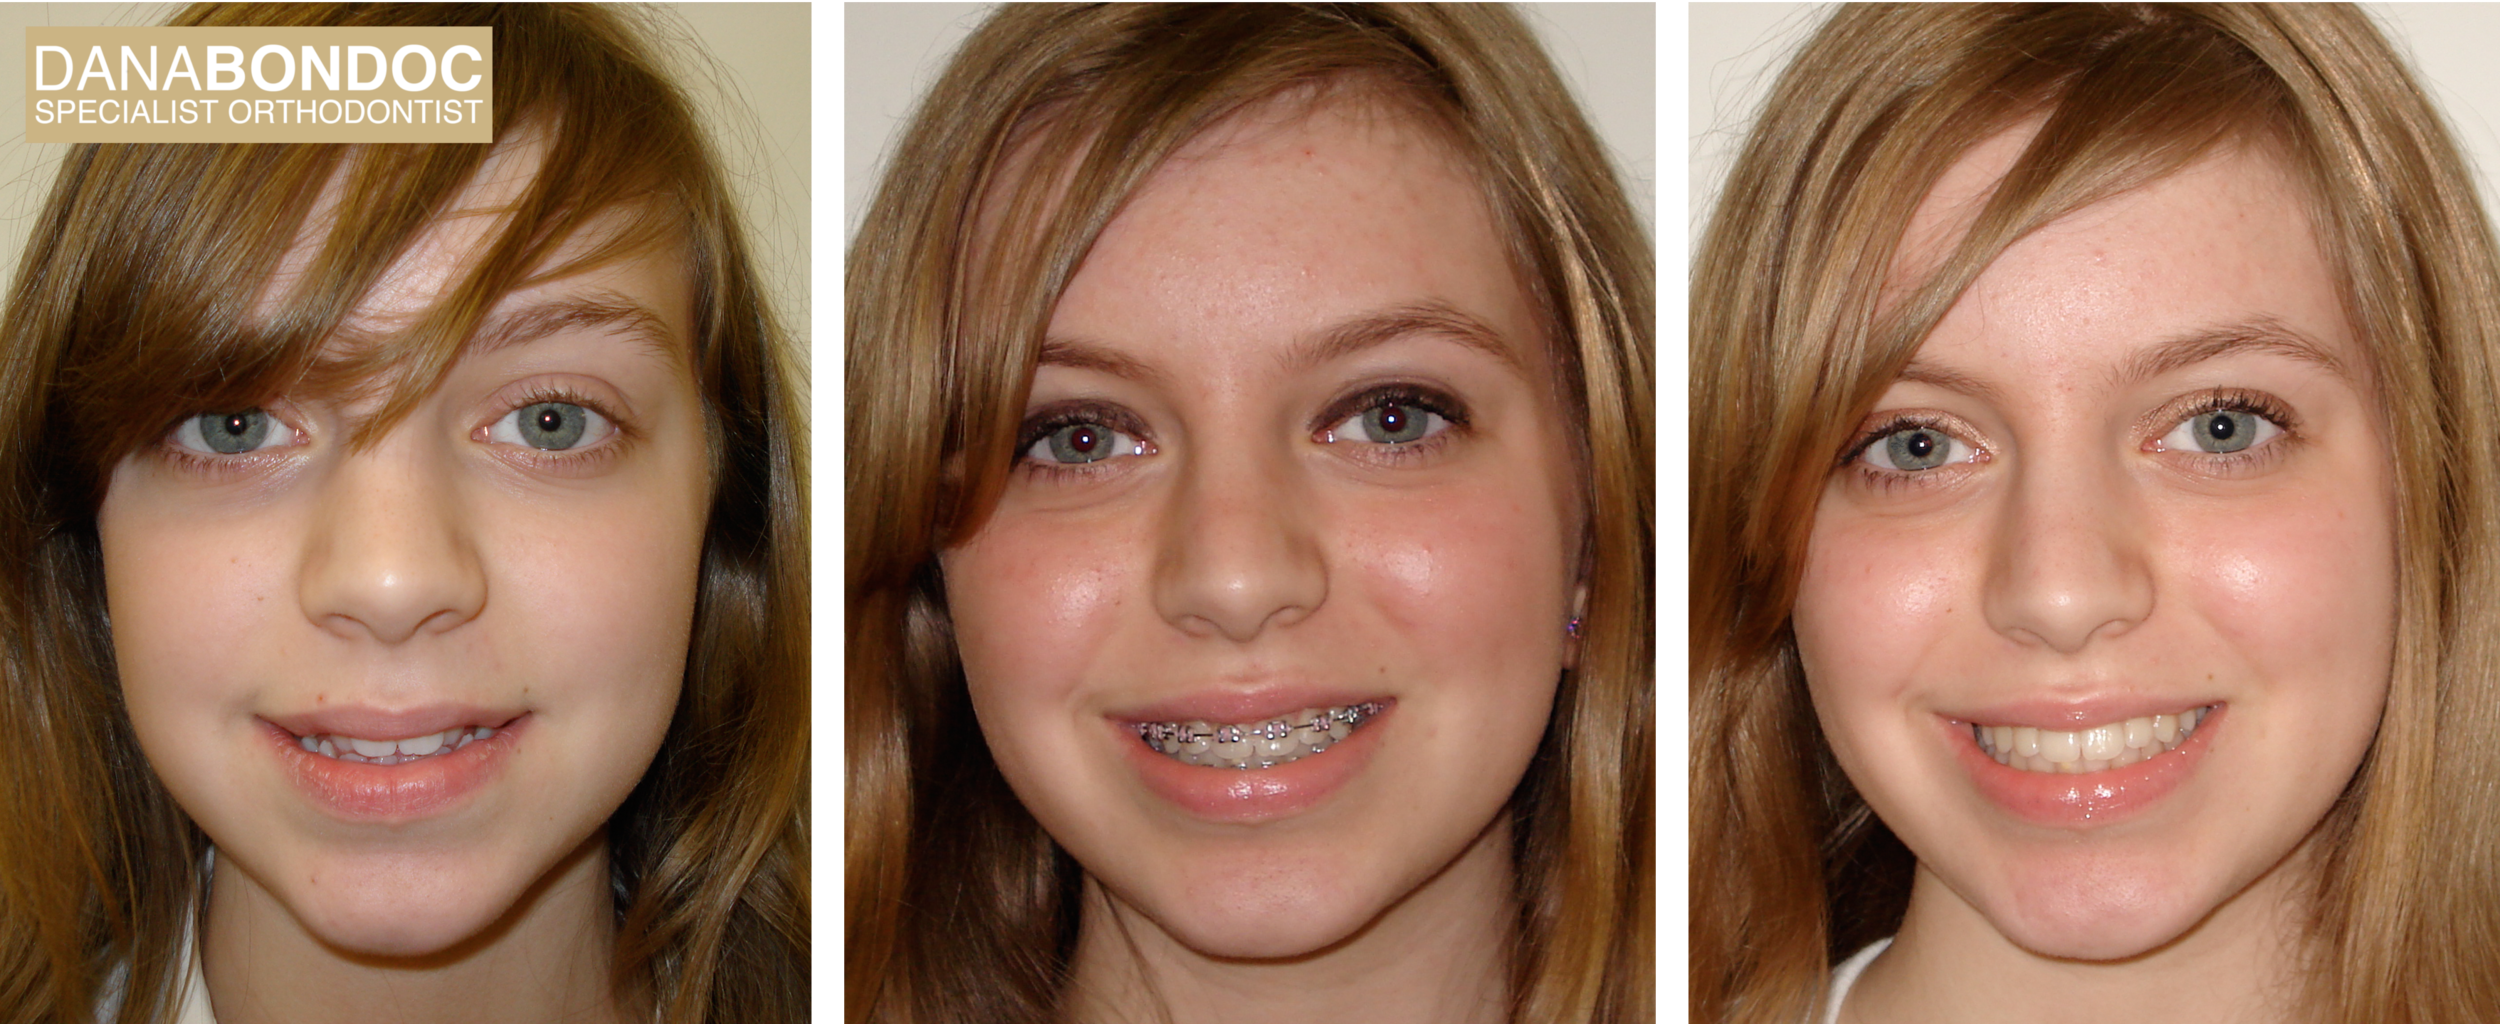 Narrow smile, before treatment, with metal braces on, after treatment photos of a female teenager and written testimonial.